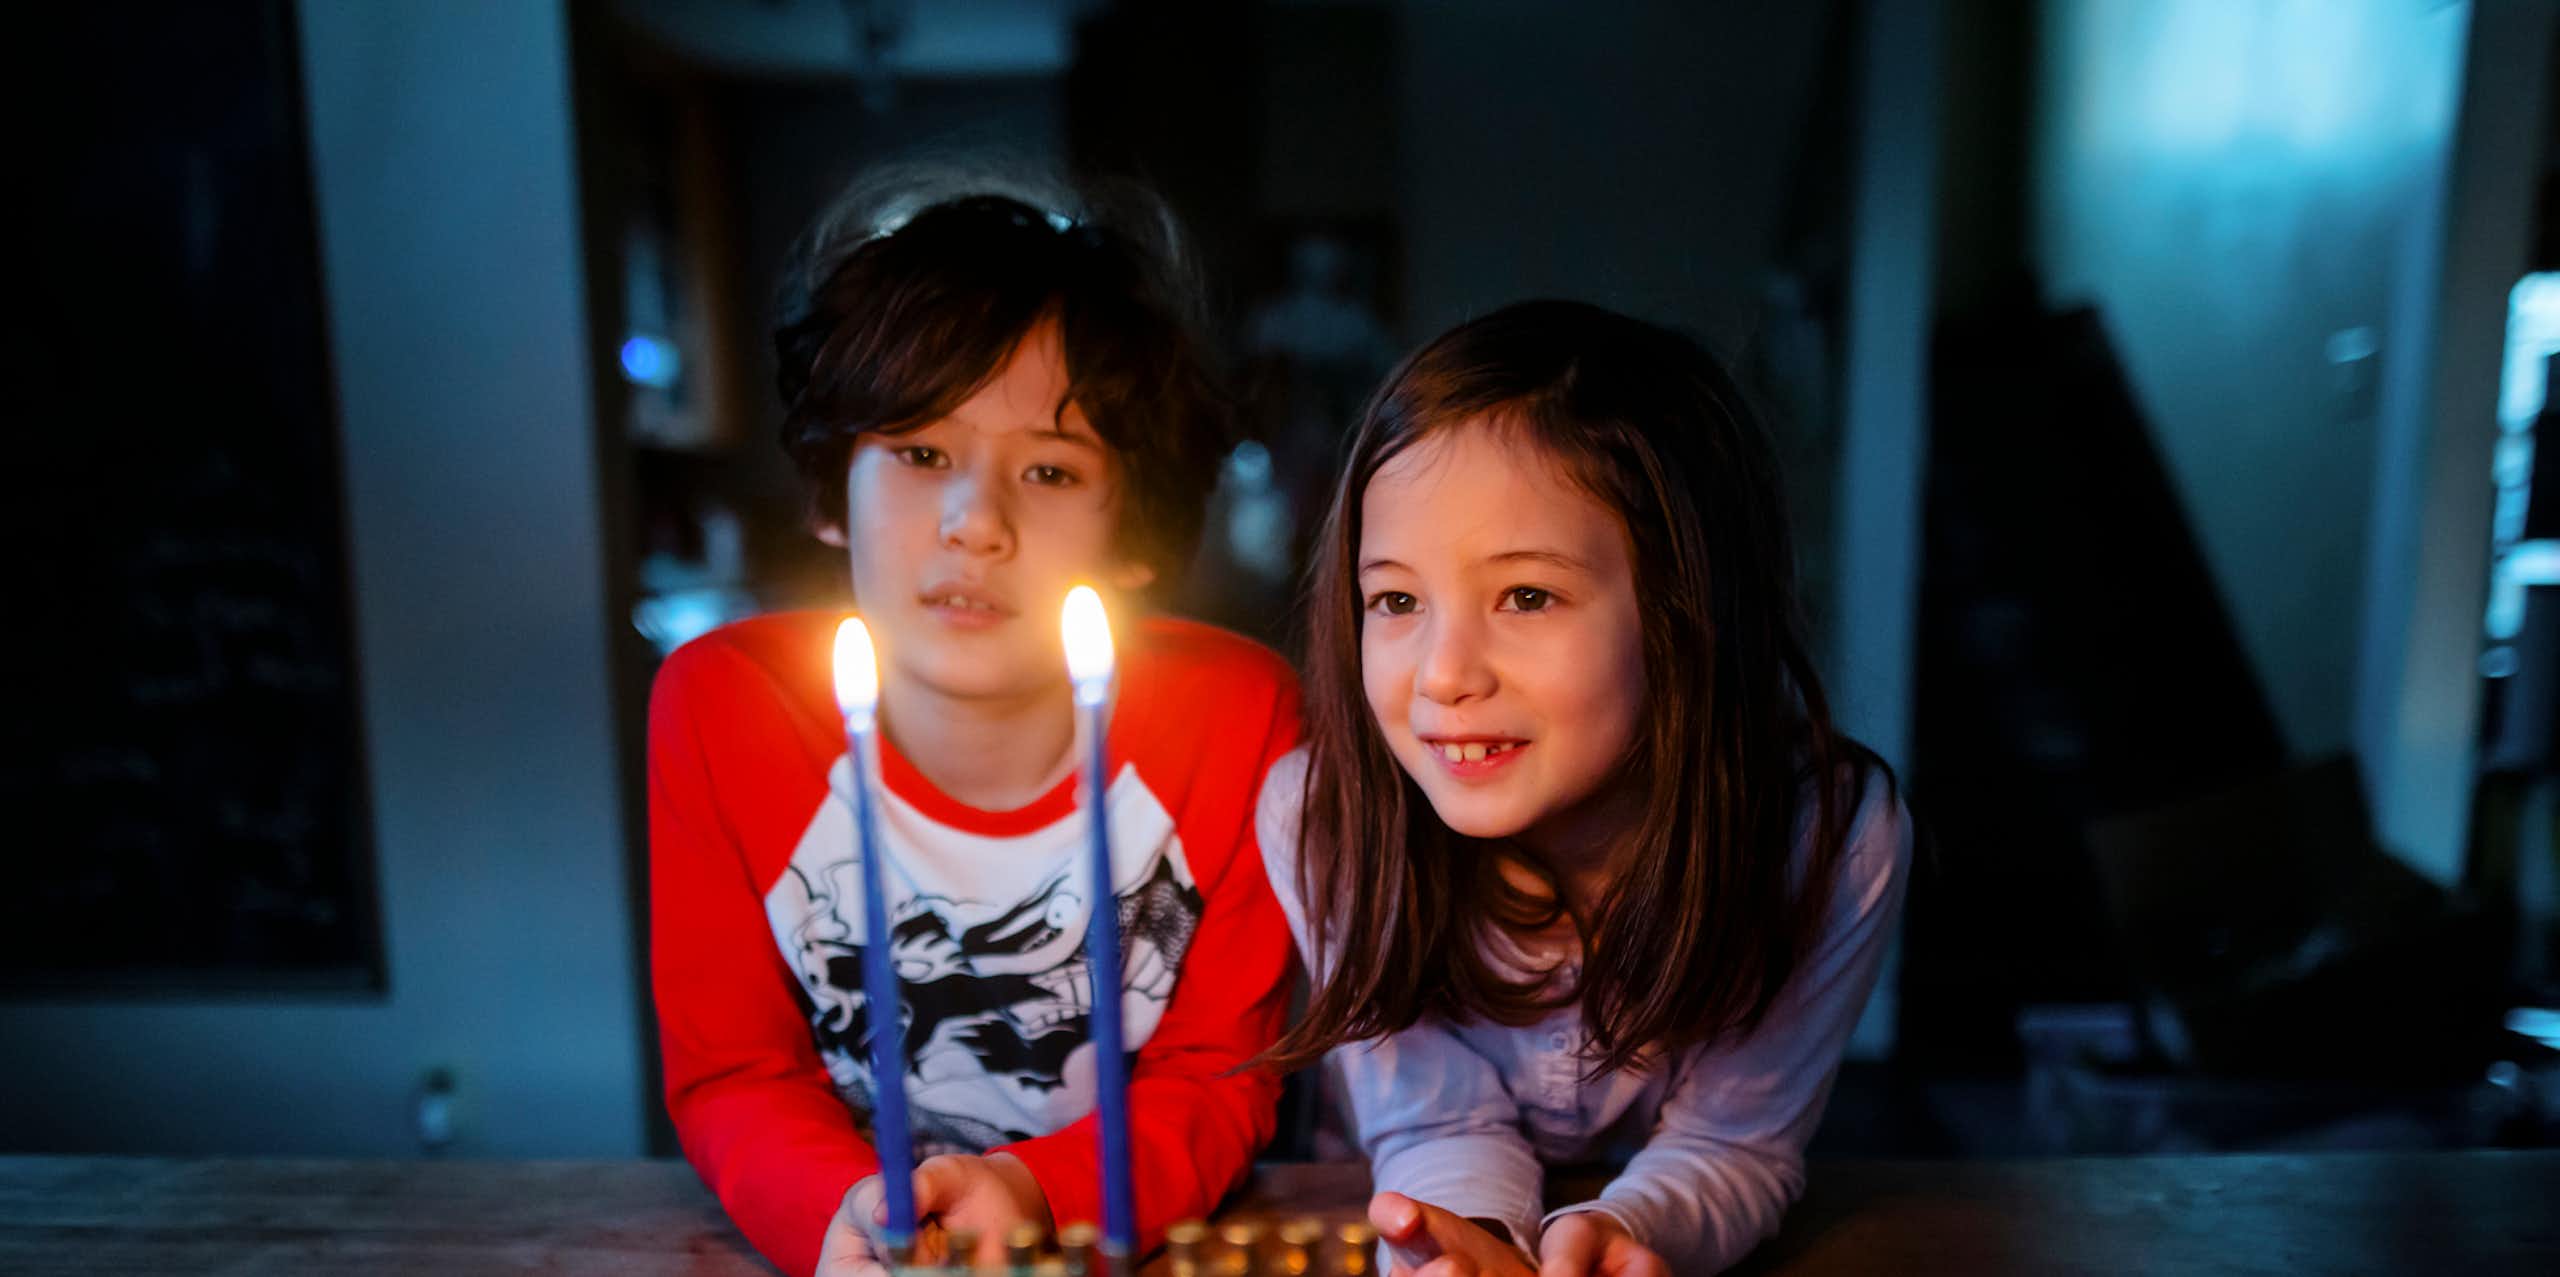 Two children in long-sleeve T-shirts look at two burning candles on a table.